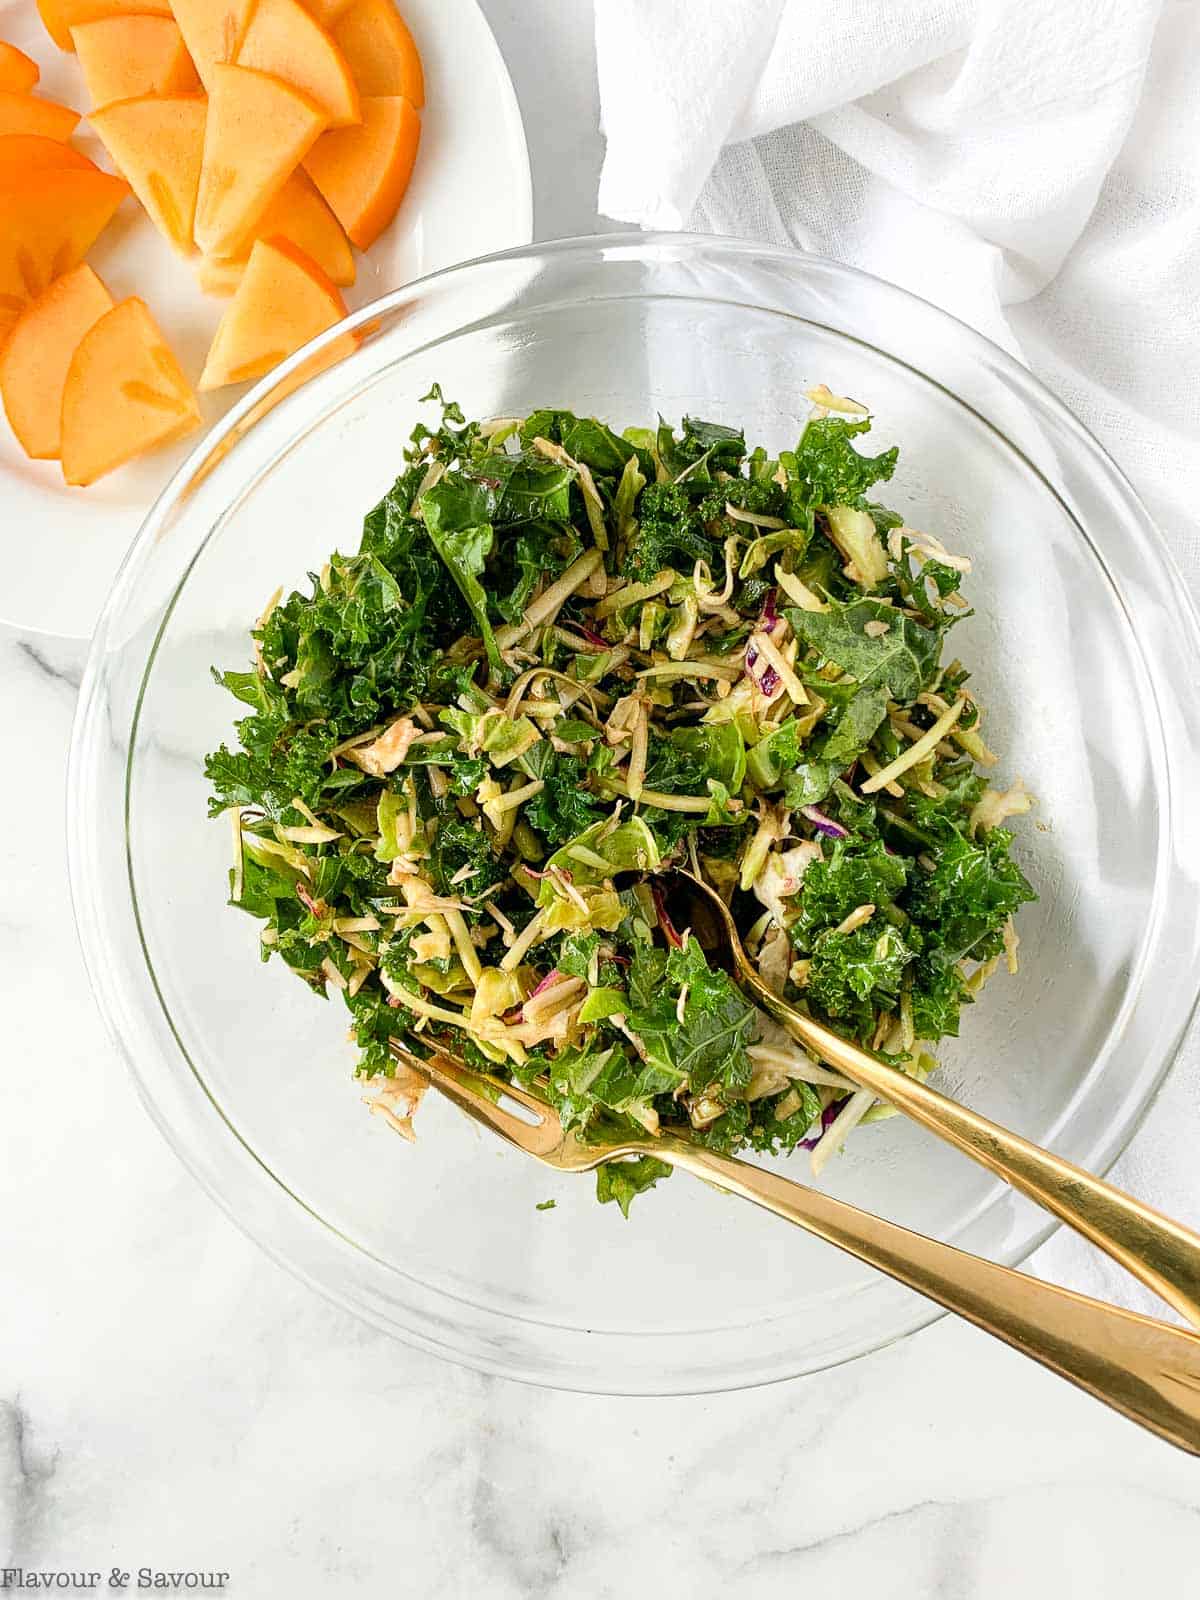 Tossing Kale Slaw with Maple Balsamic Dressing